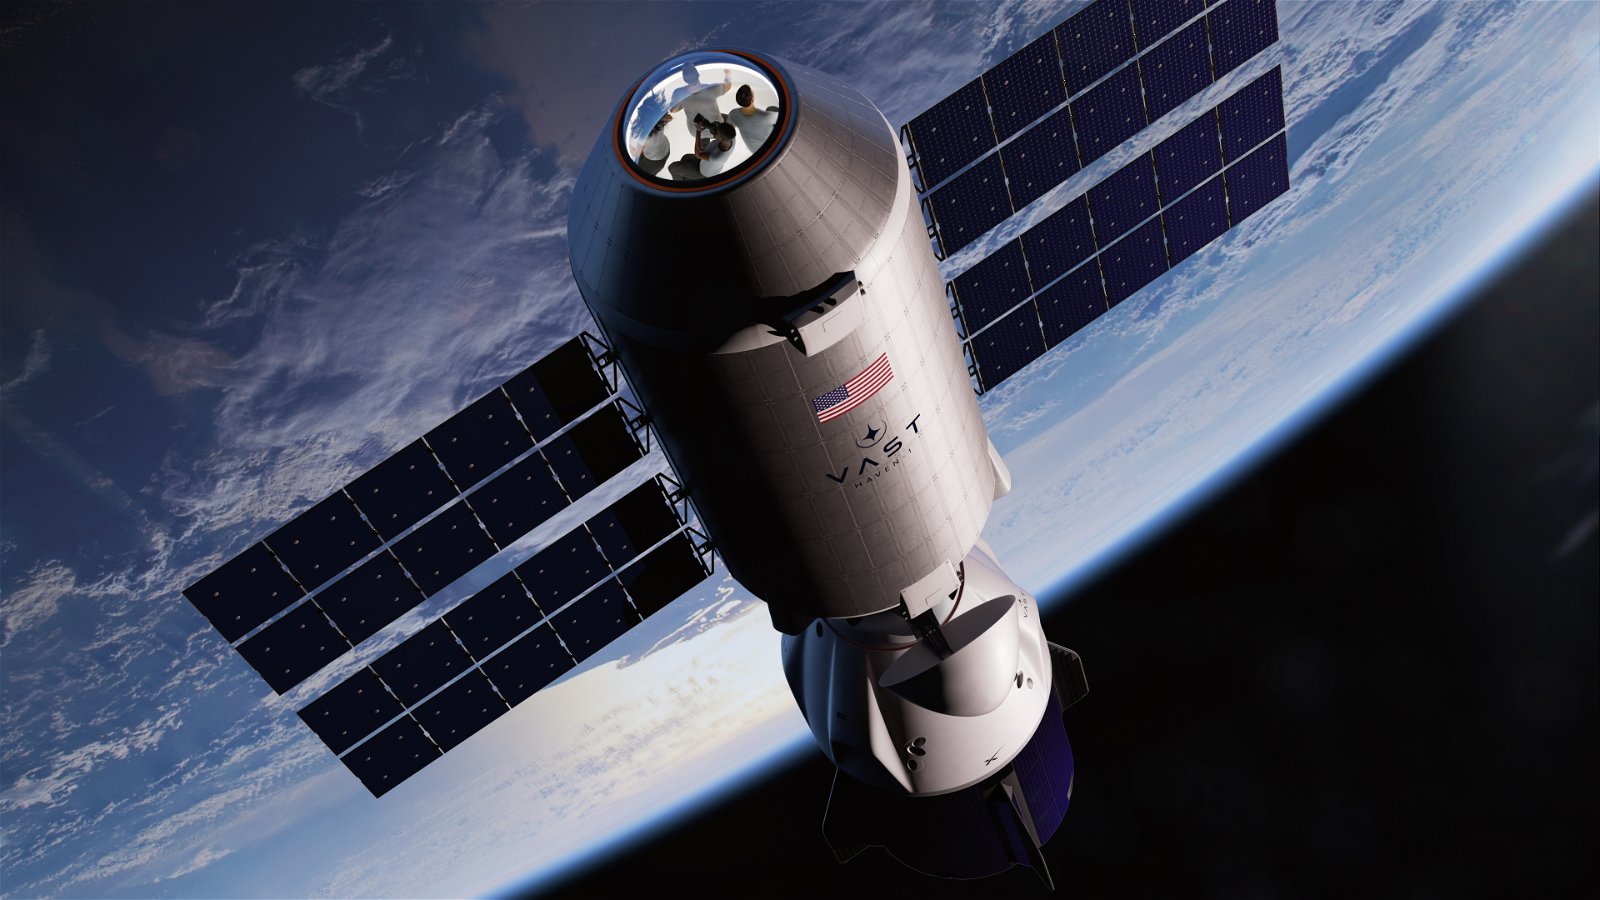 This startup aims to launch a commercial space station in 2025